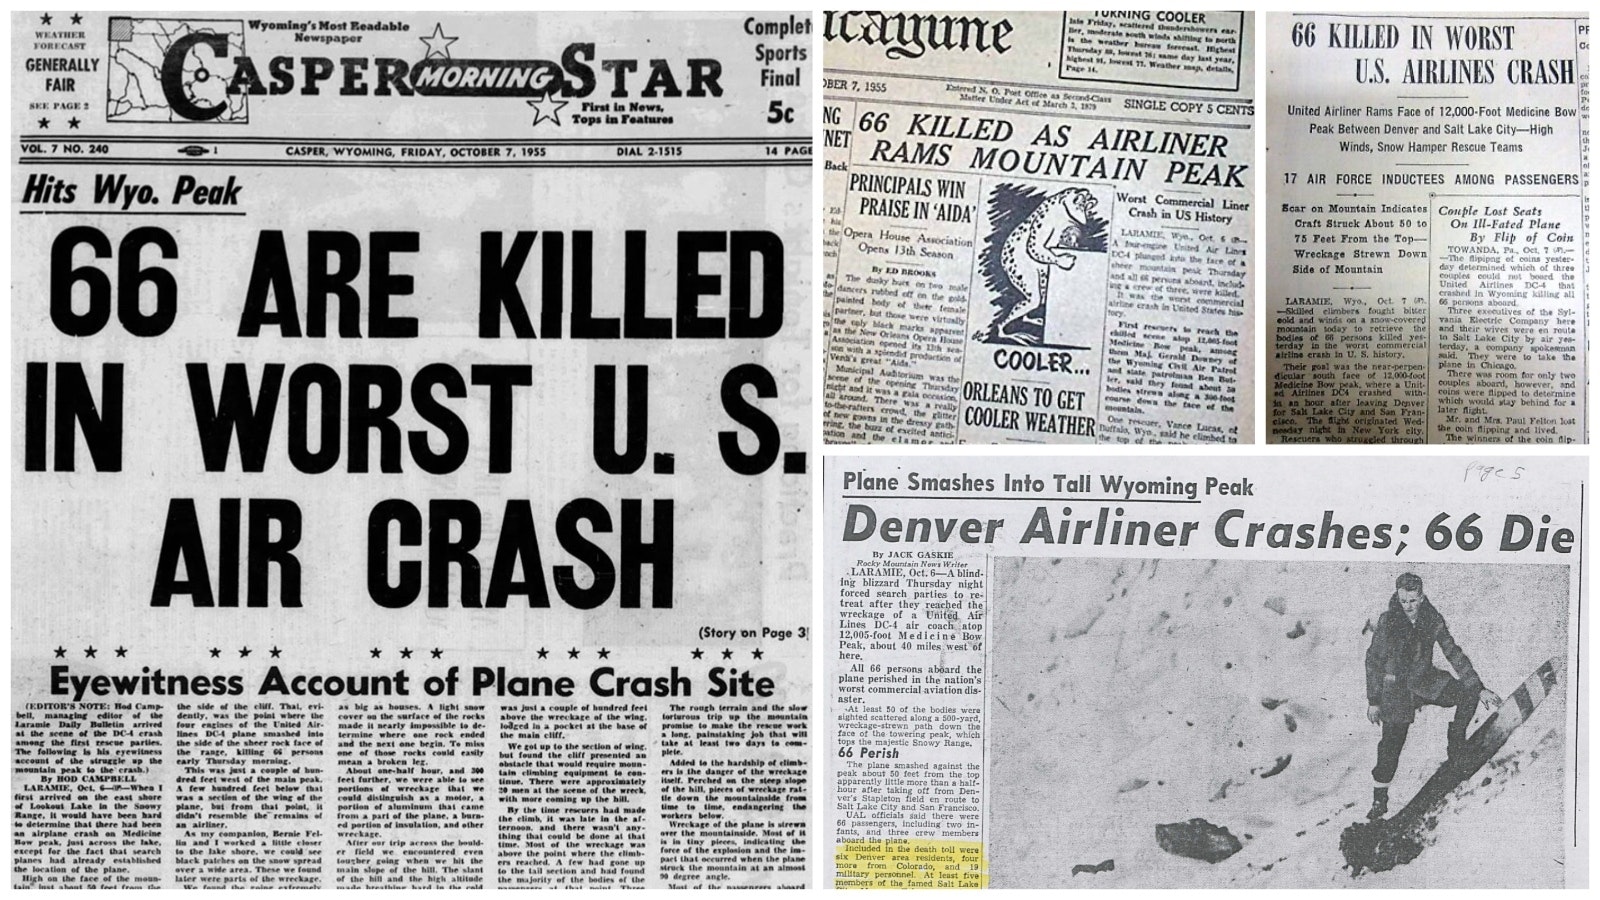 The crash of Flight 409 in 1955 was the worst U.S. airline disaster in history at the time.